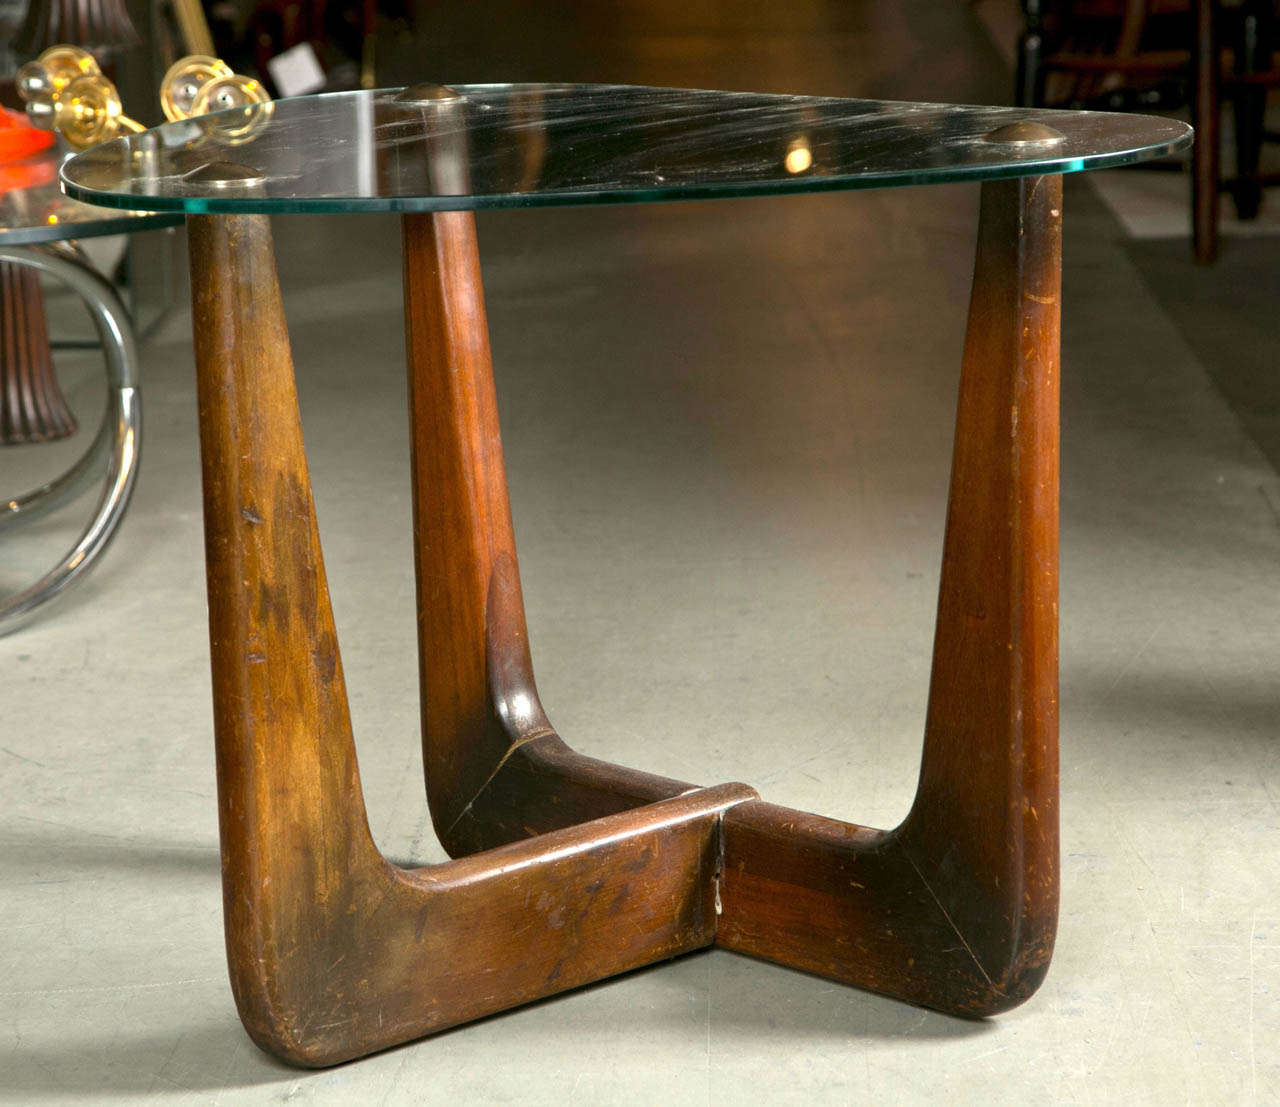 Sleek mid century design table in the style of Finn Juhl.
Brass caps on tips supporting glass top.